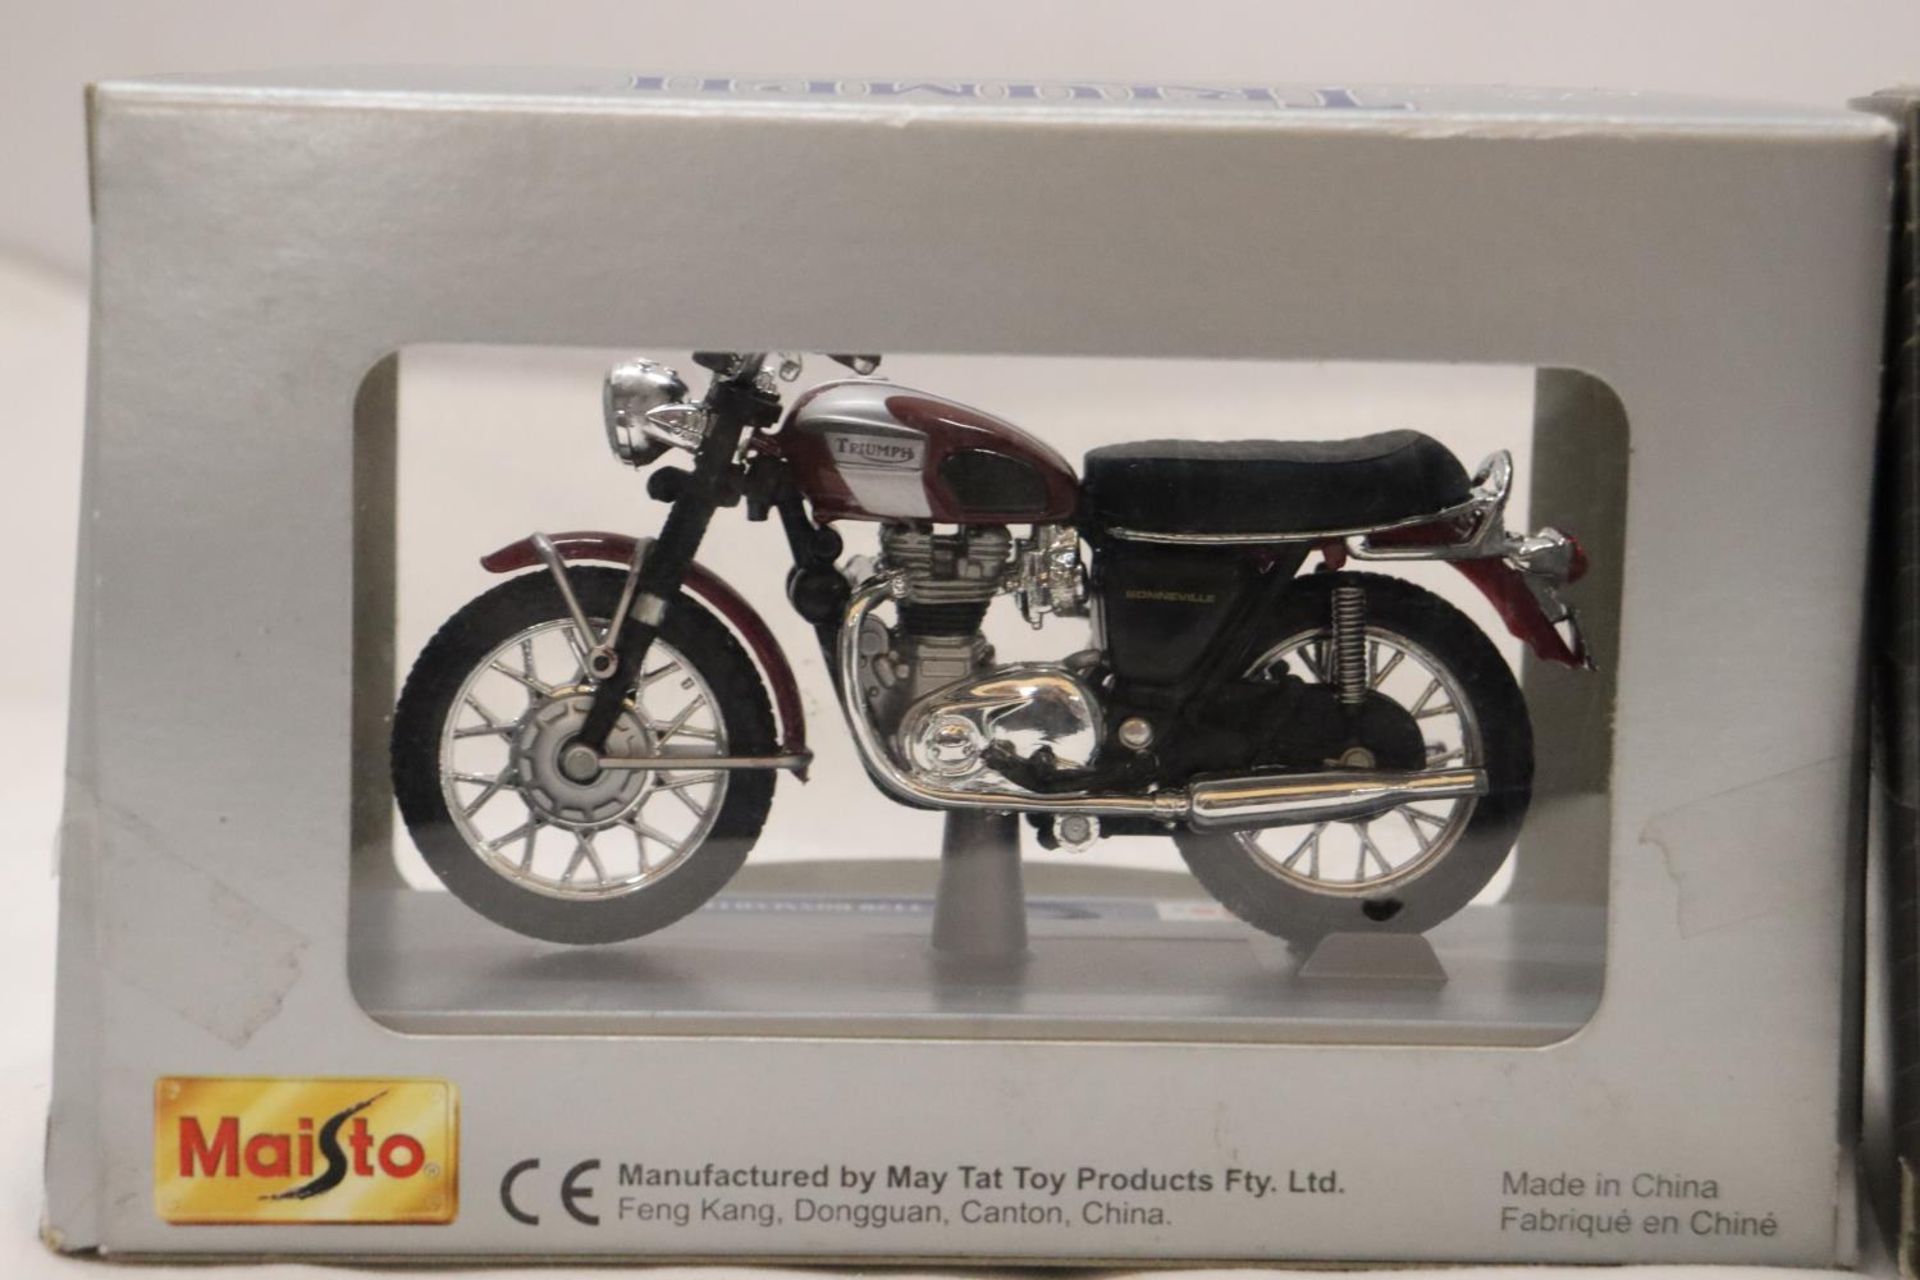 TWO AS NEW MODEL MOTORBIKES IN BOXES - A TRIUMPH T120 BONNEVILLE AND A KAWASAKI - Image 7 of 8